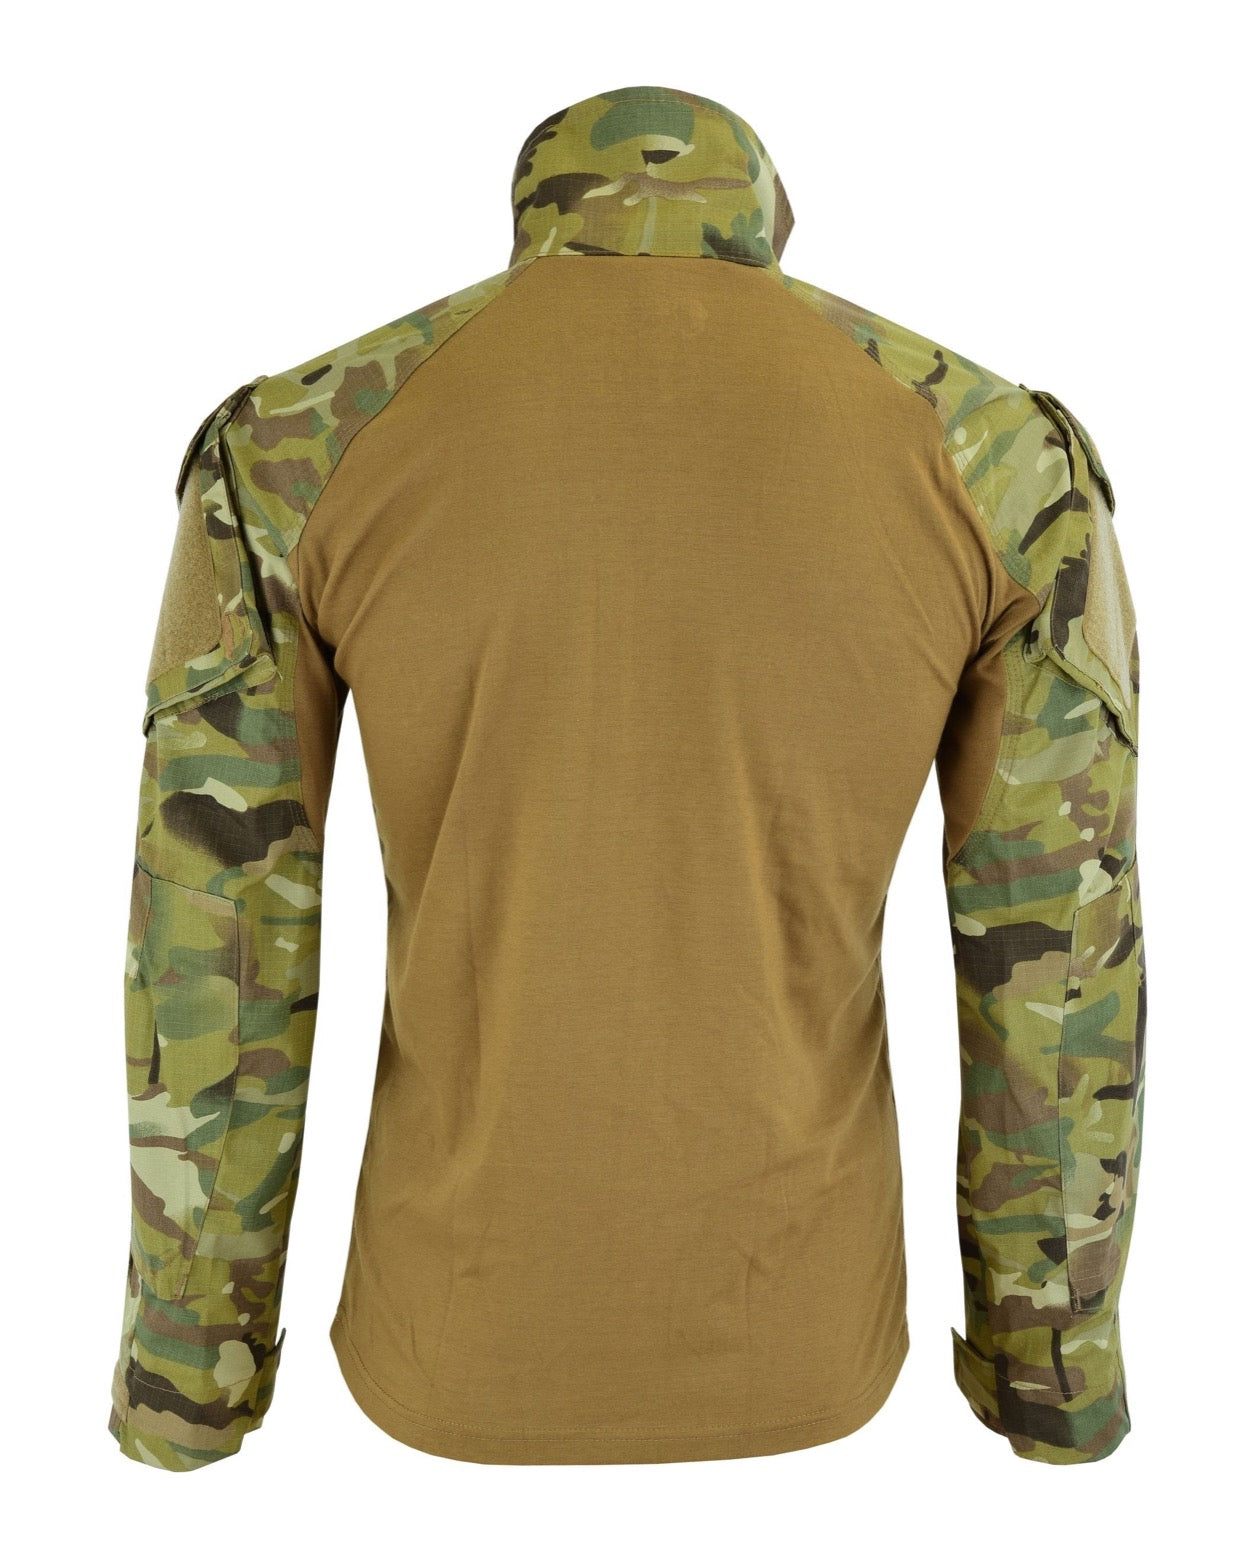 Tactical zone HYBRID TACTICAL SHIRT IS A PERFECT COMBAT SHIRT Colour UTP Back